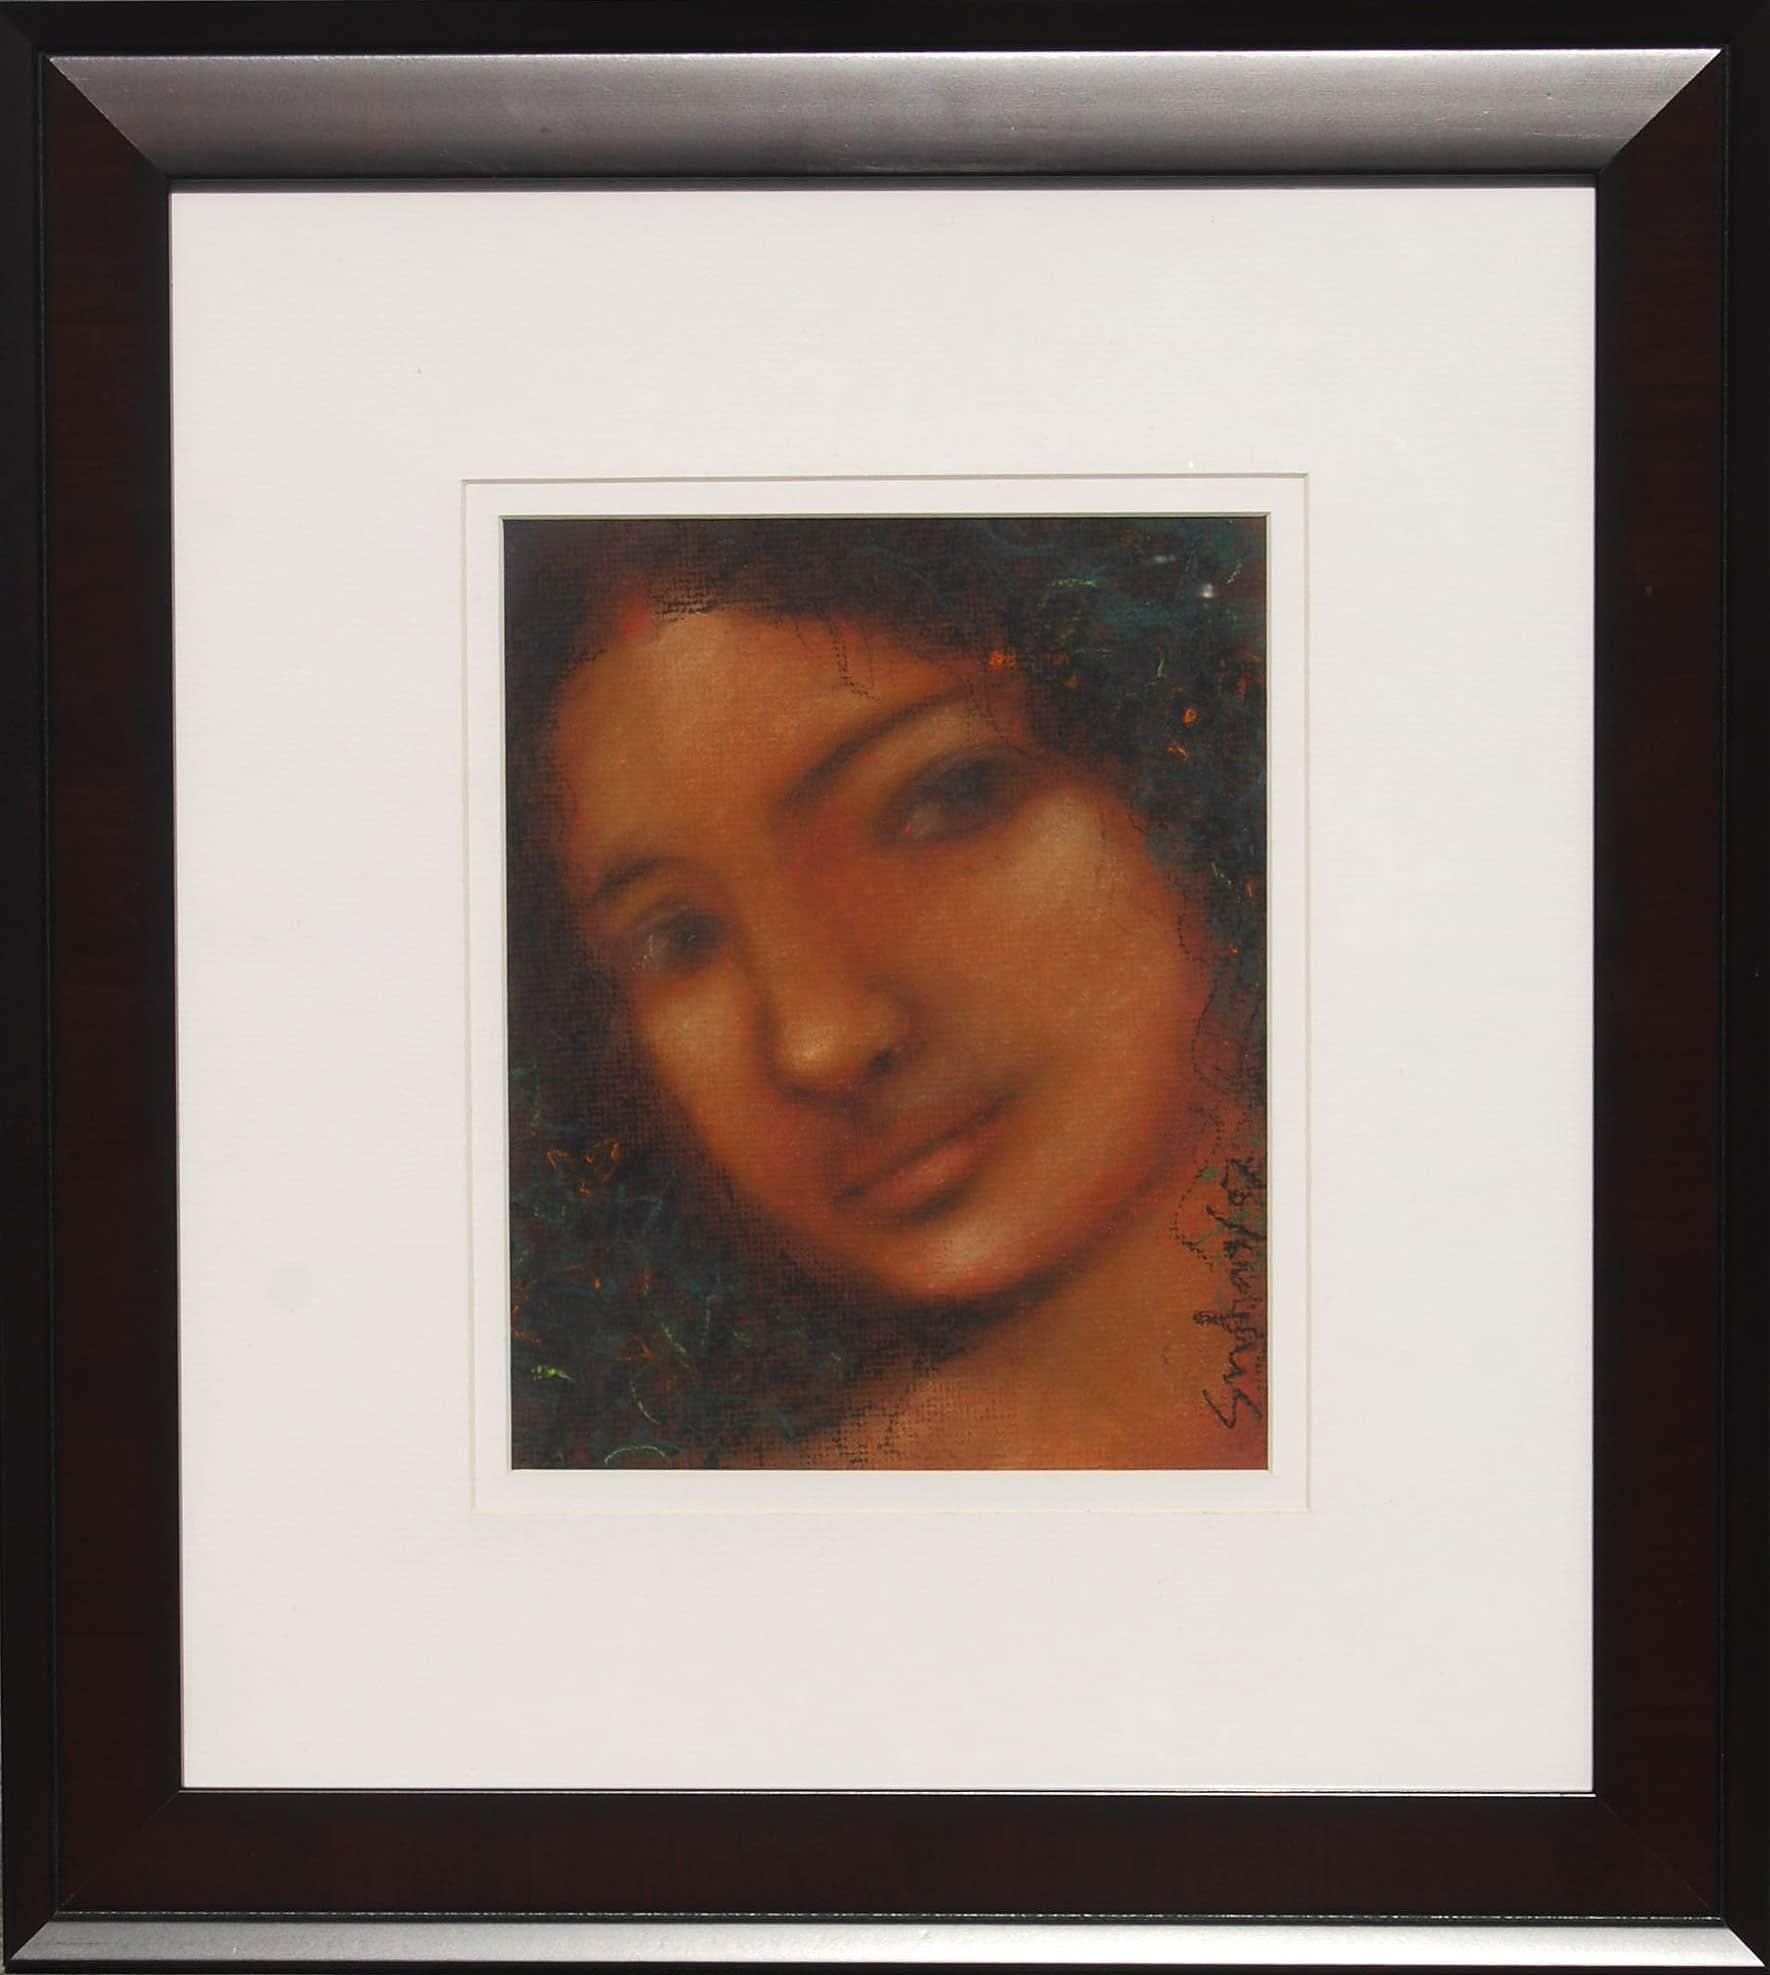 Suhas Roy Figurative Painting - Radha, Mysterious, Colored Pastel on Paper, Red, Blue by Indian Artist"In Stock"